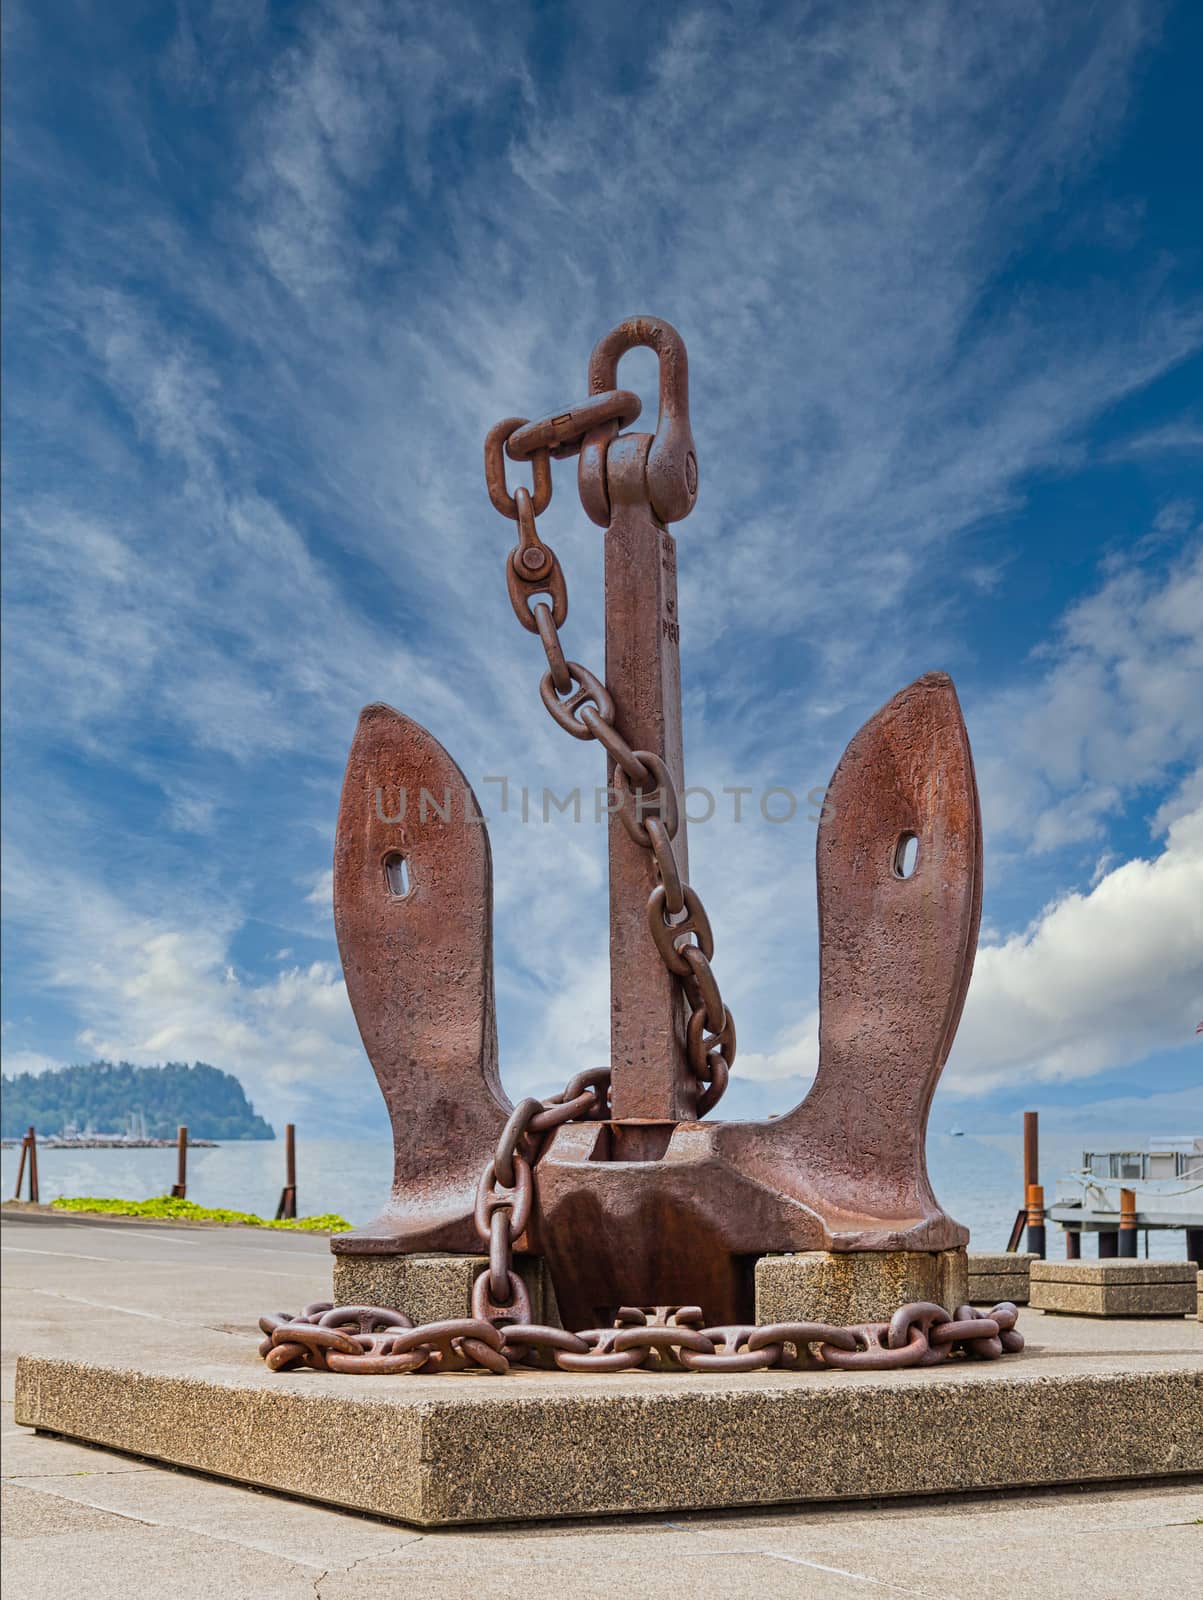 Massive Anchor and Chain on Dock in Astoria